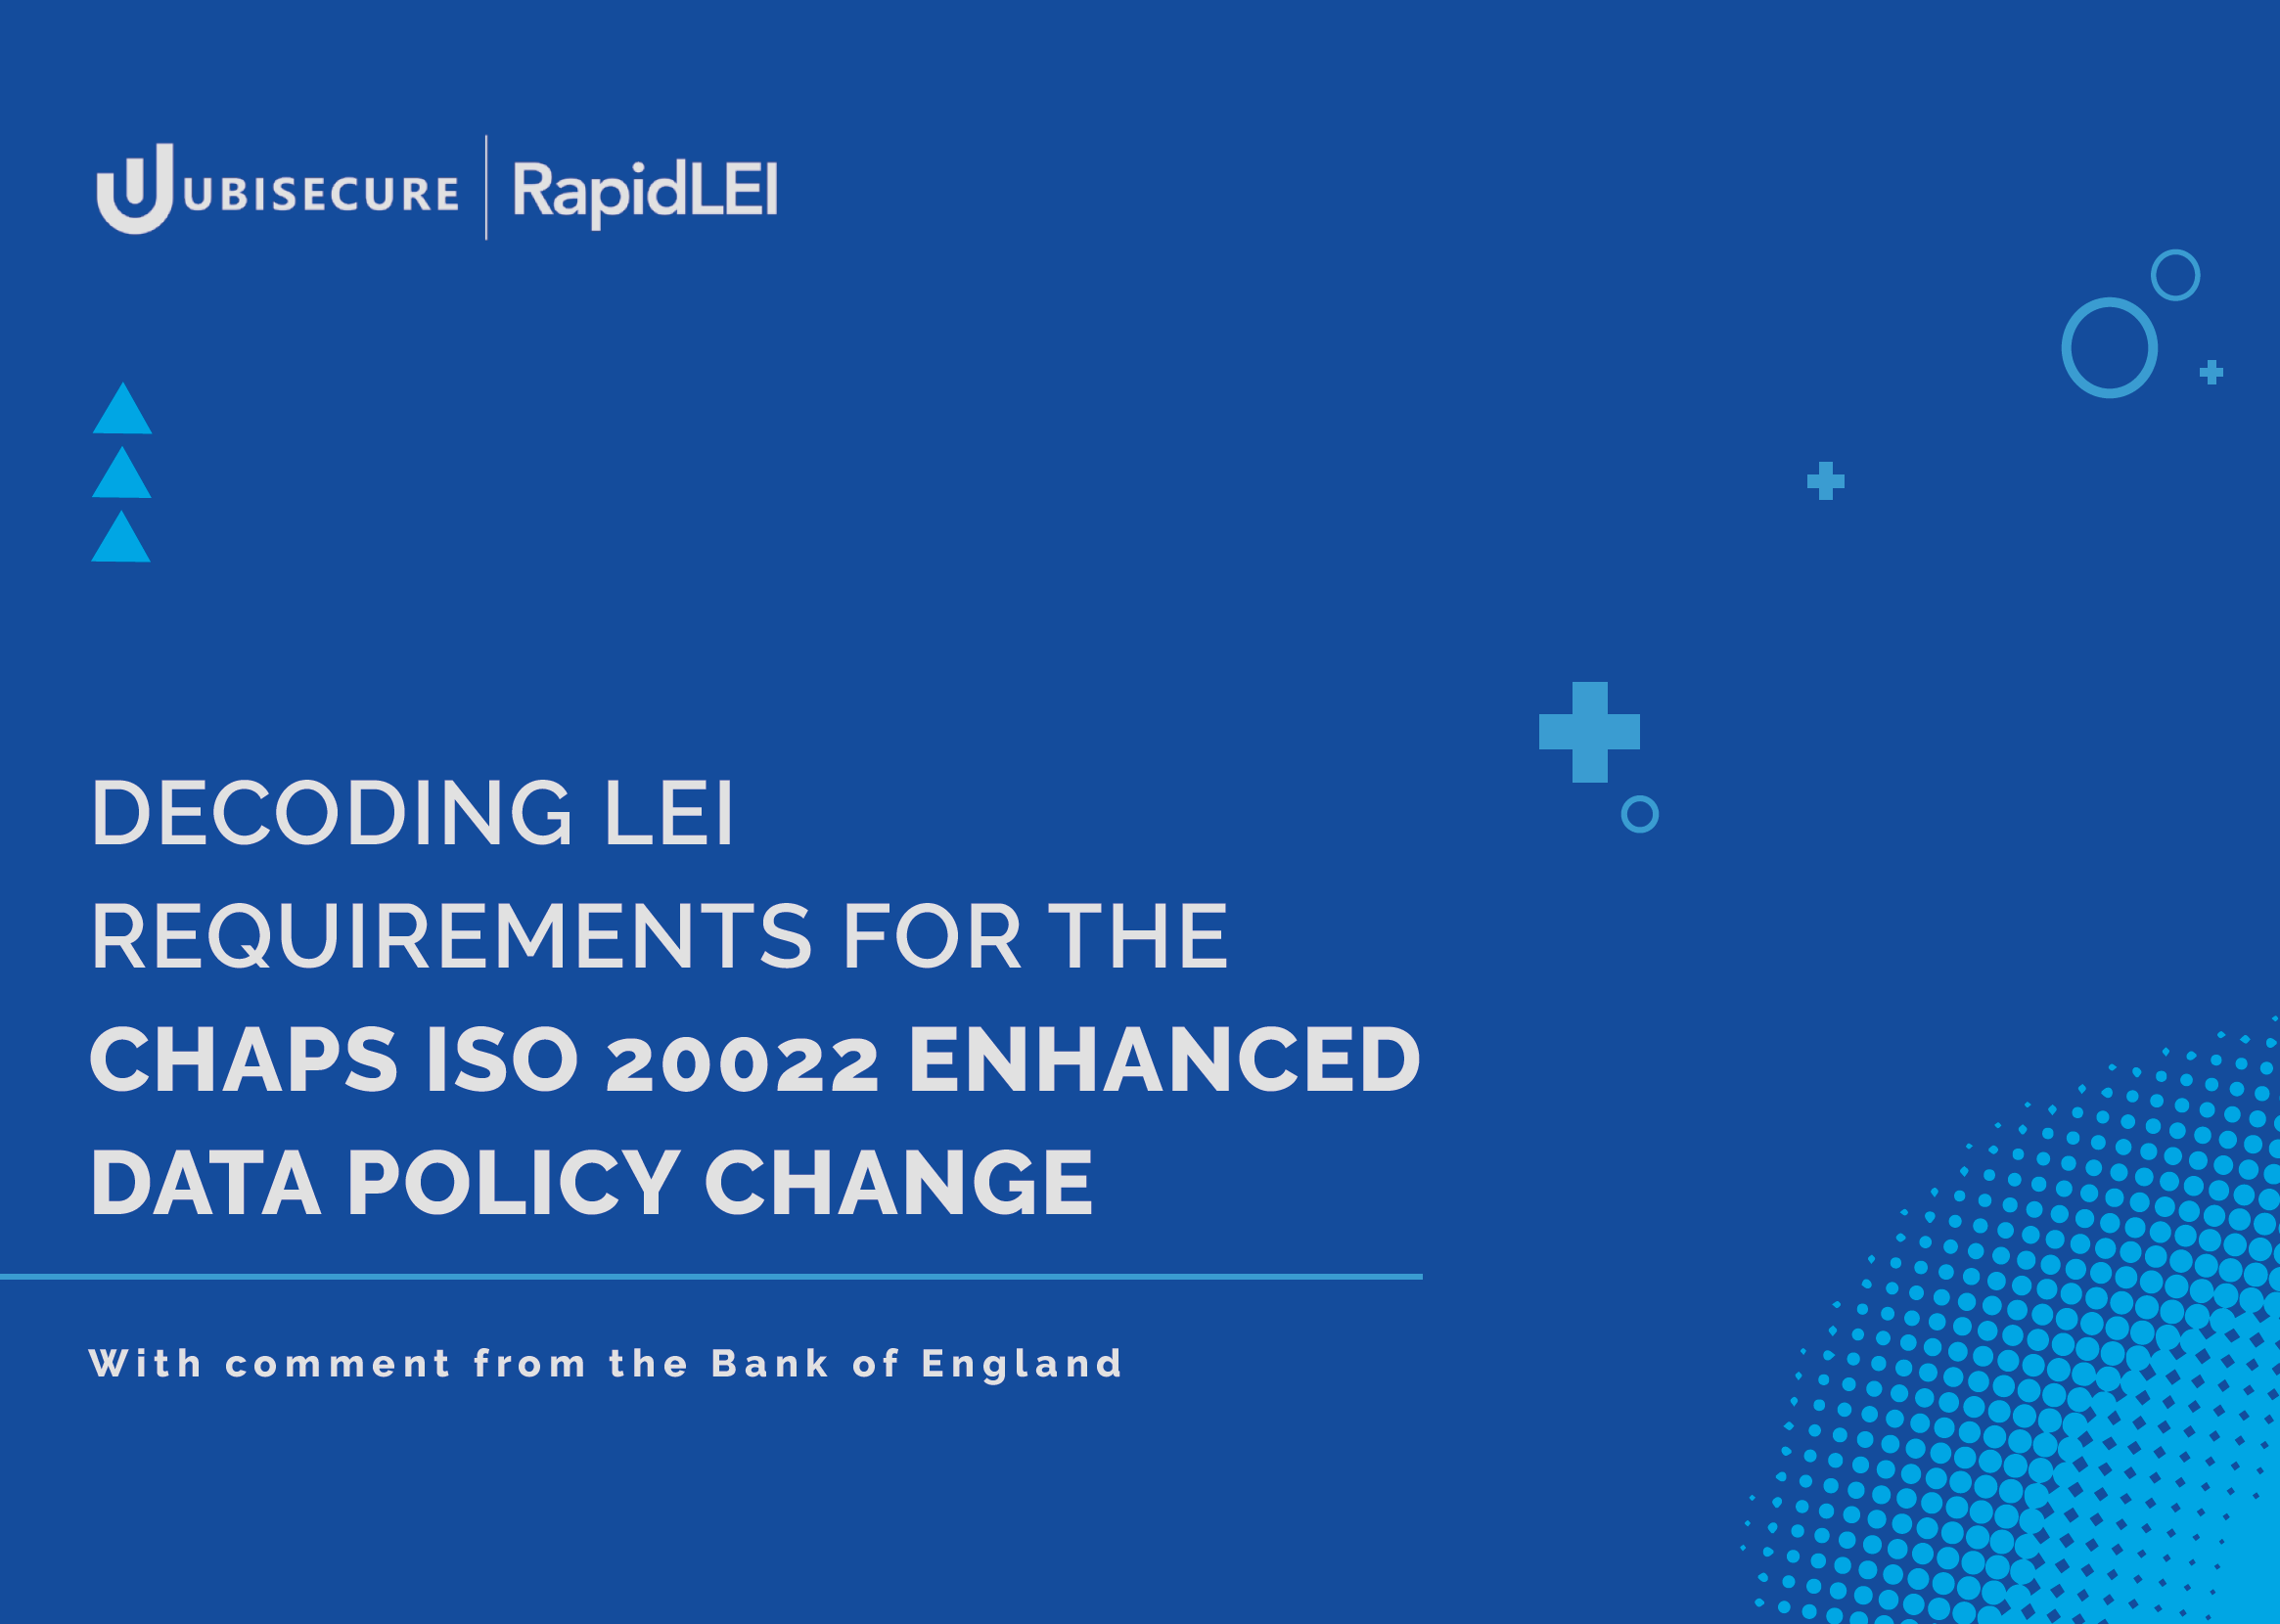 Decoding LEI for CHAPS ISO 20022